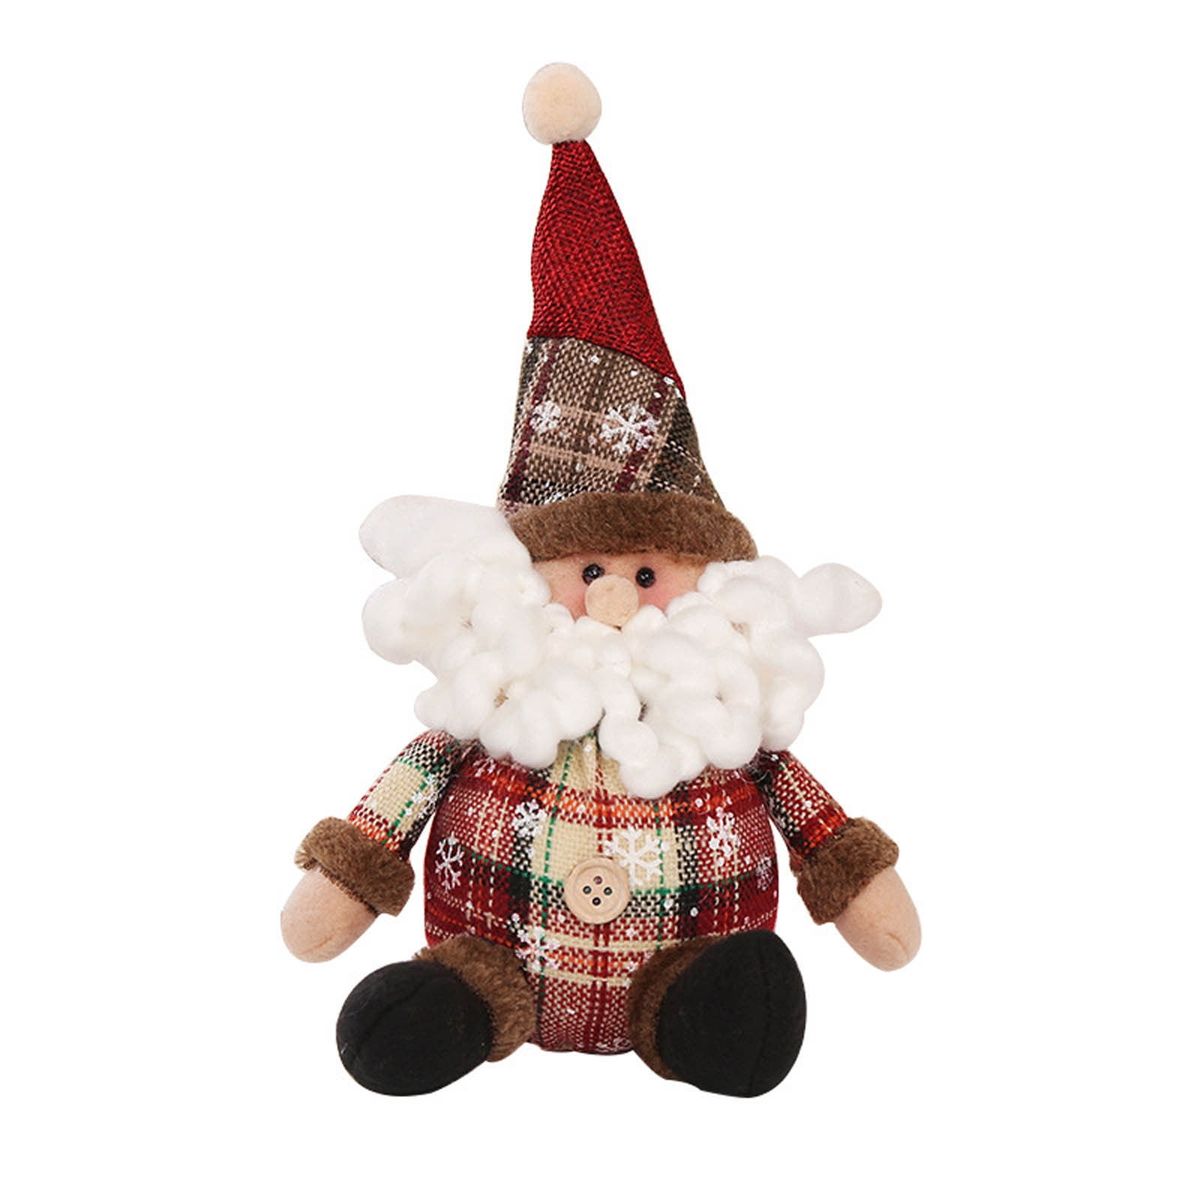 RODS -Christmas doll decoration